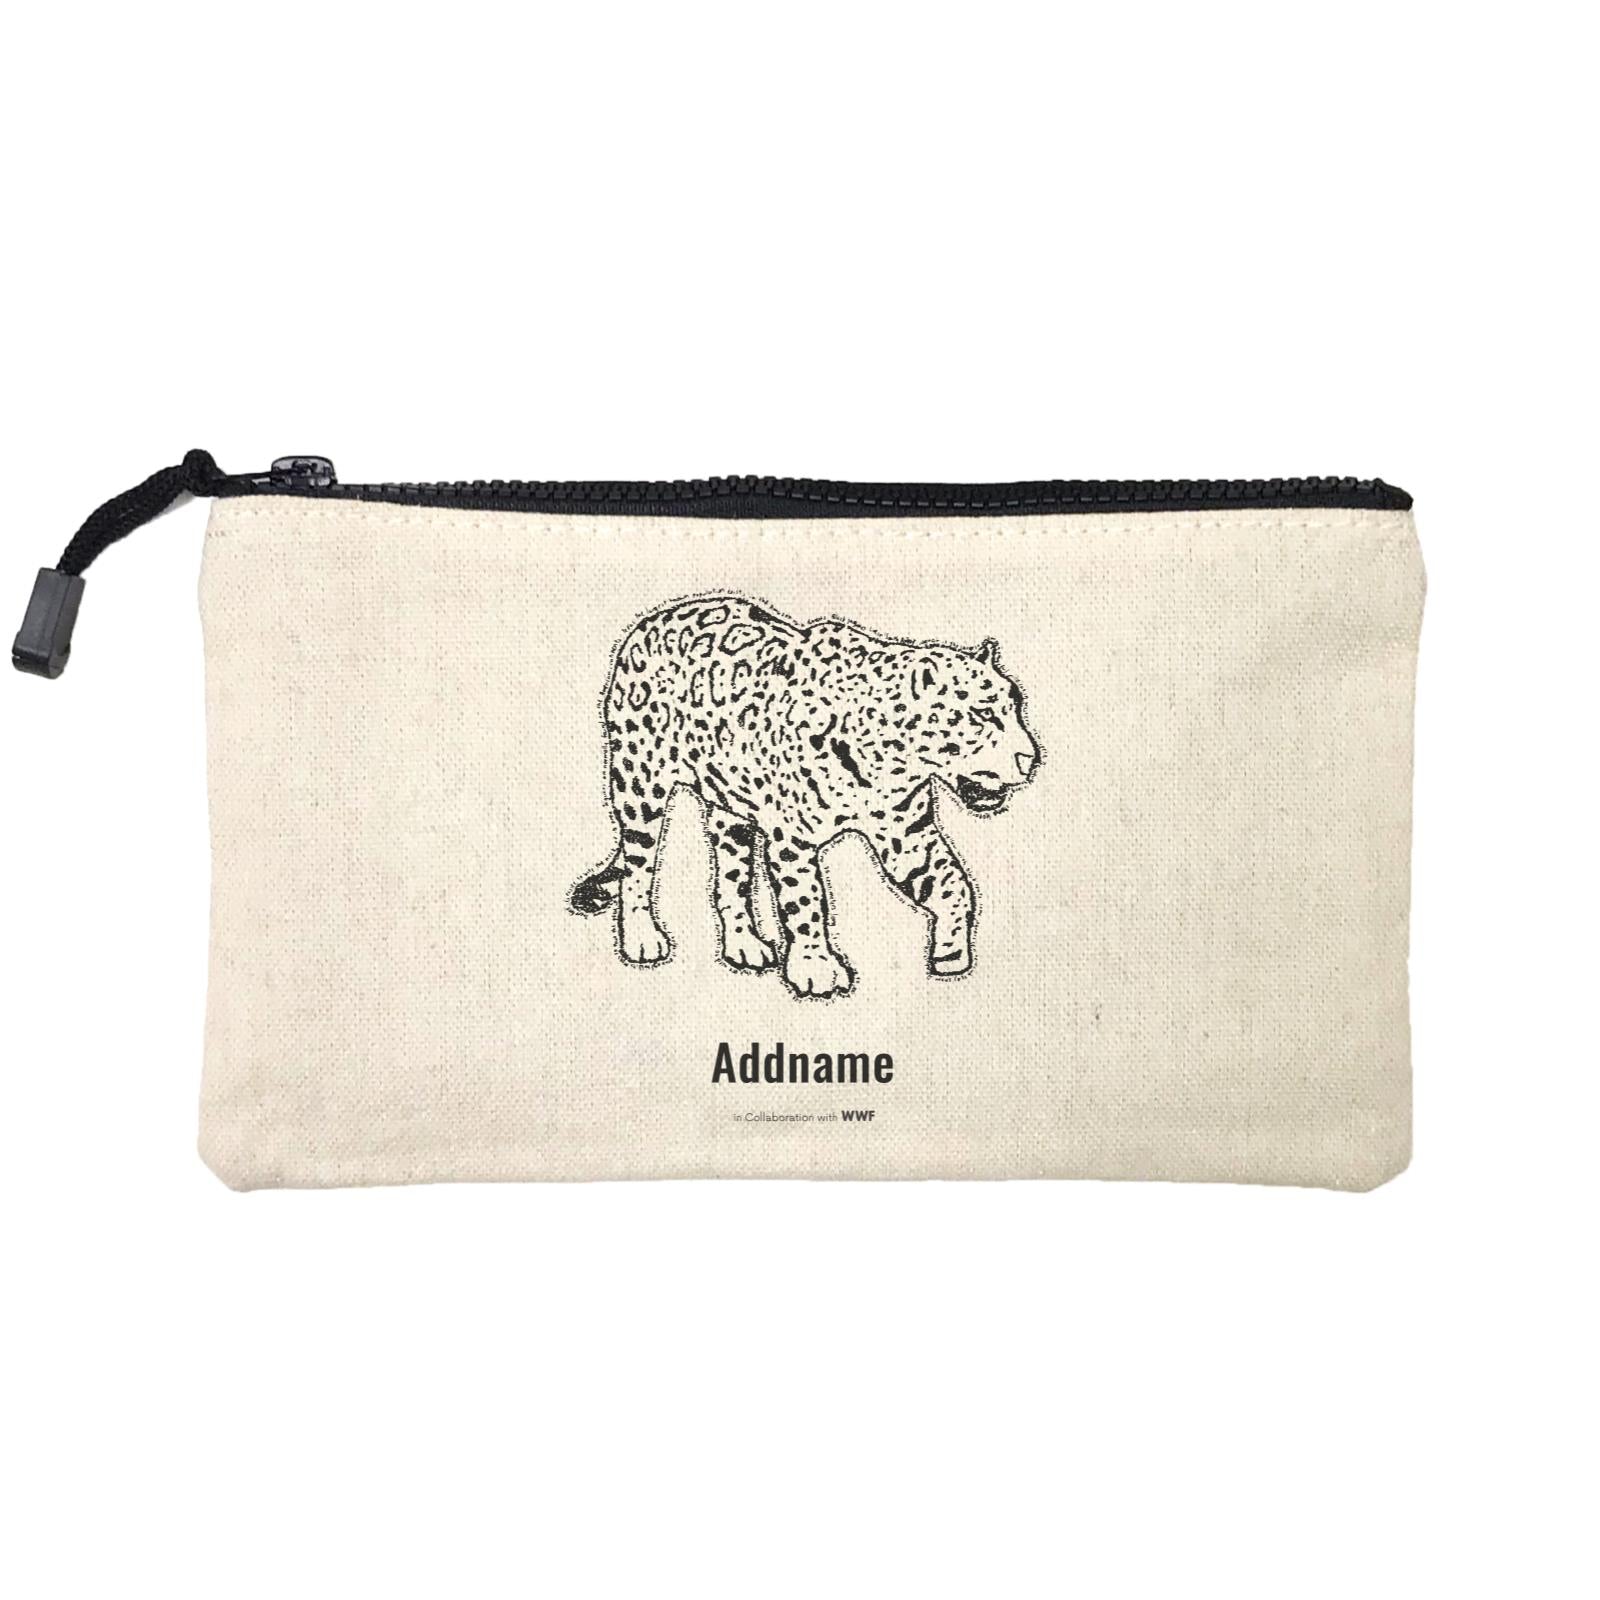 Hand Written Animals Black Jaguar By ArtC Addname Mini Accessories Stationery Pouch